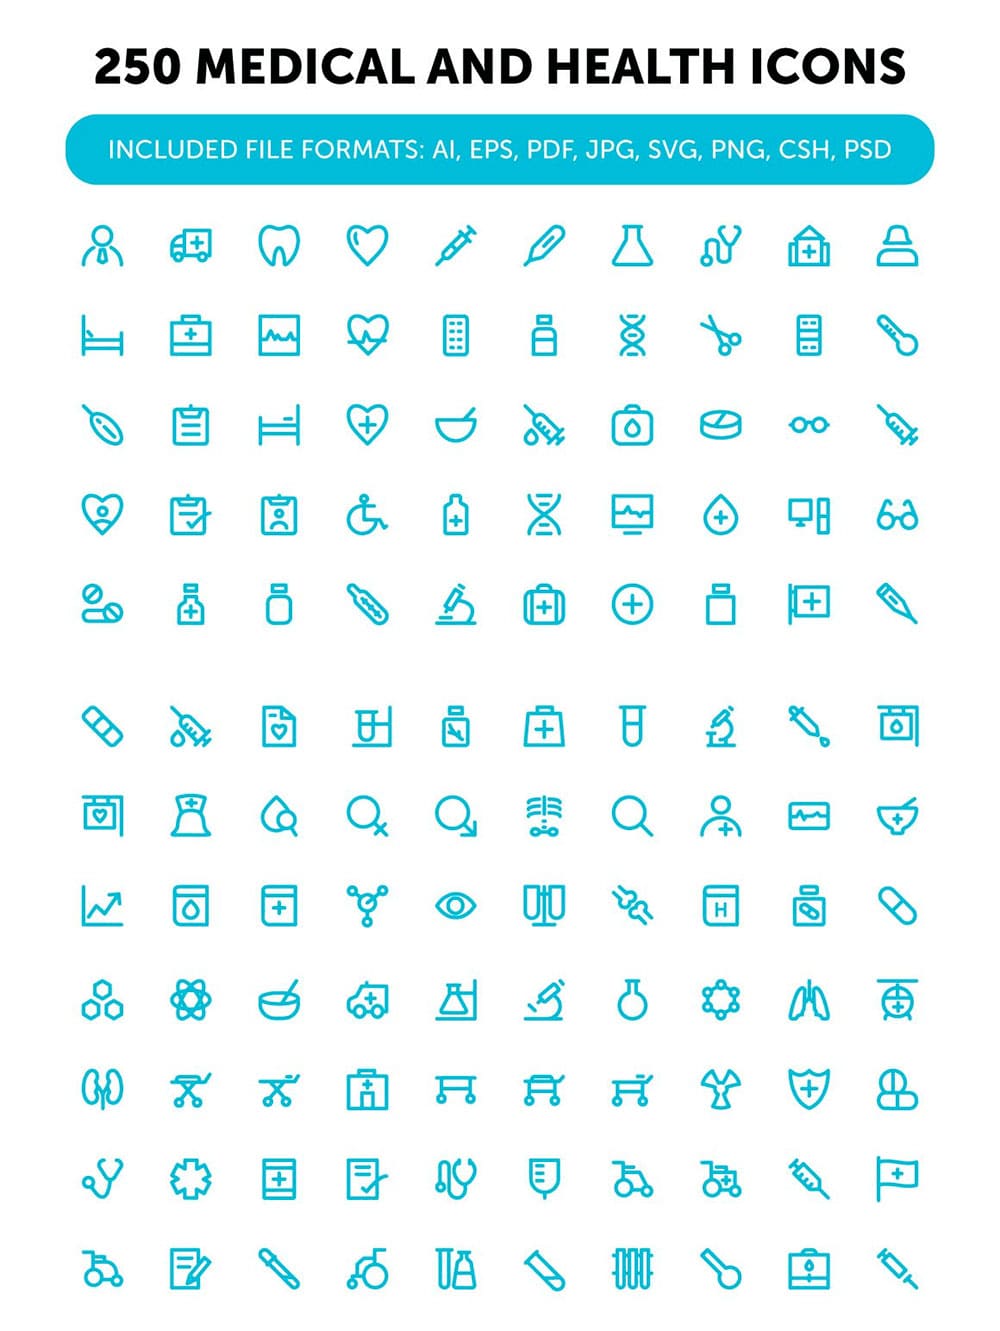 250 medical and health icons, picture for pinterest.